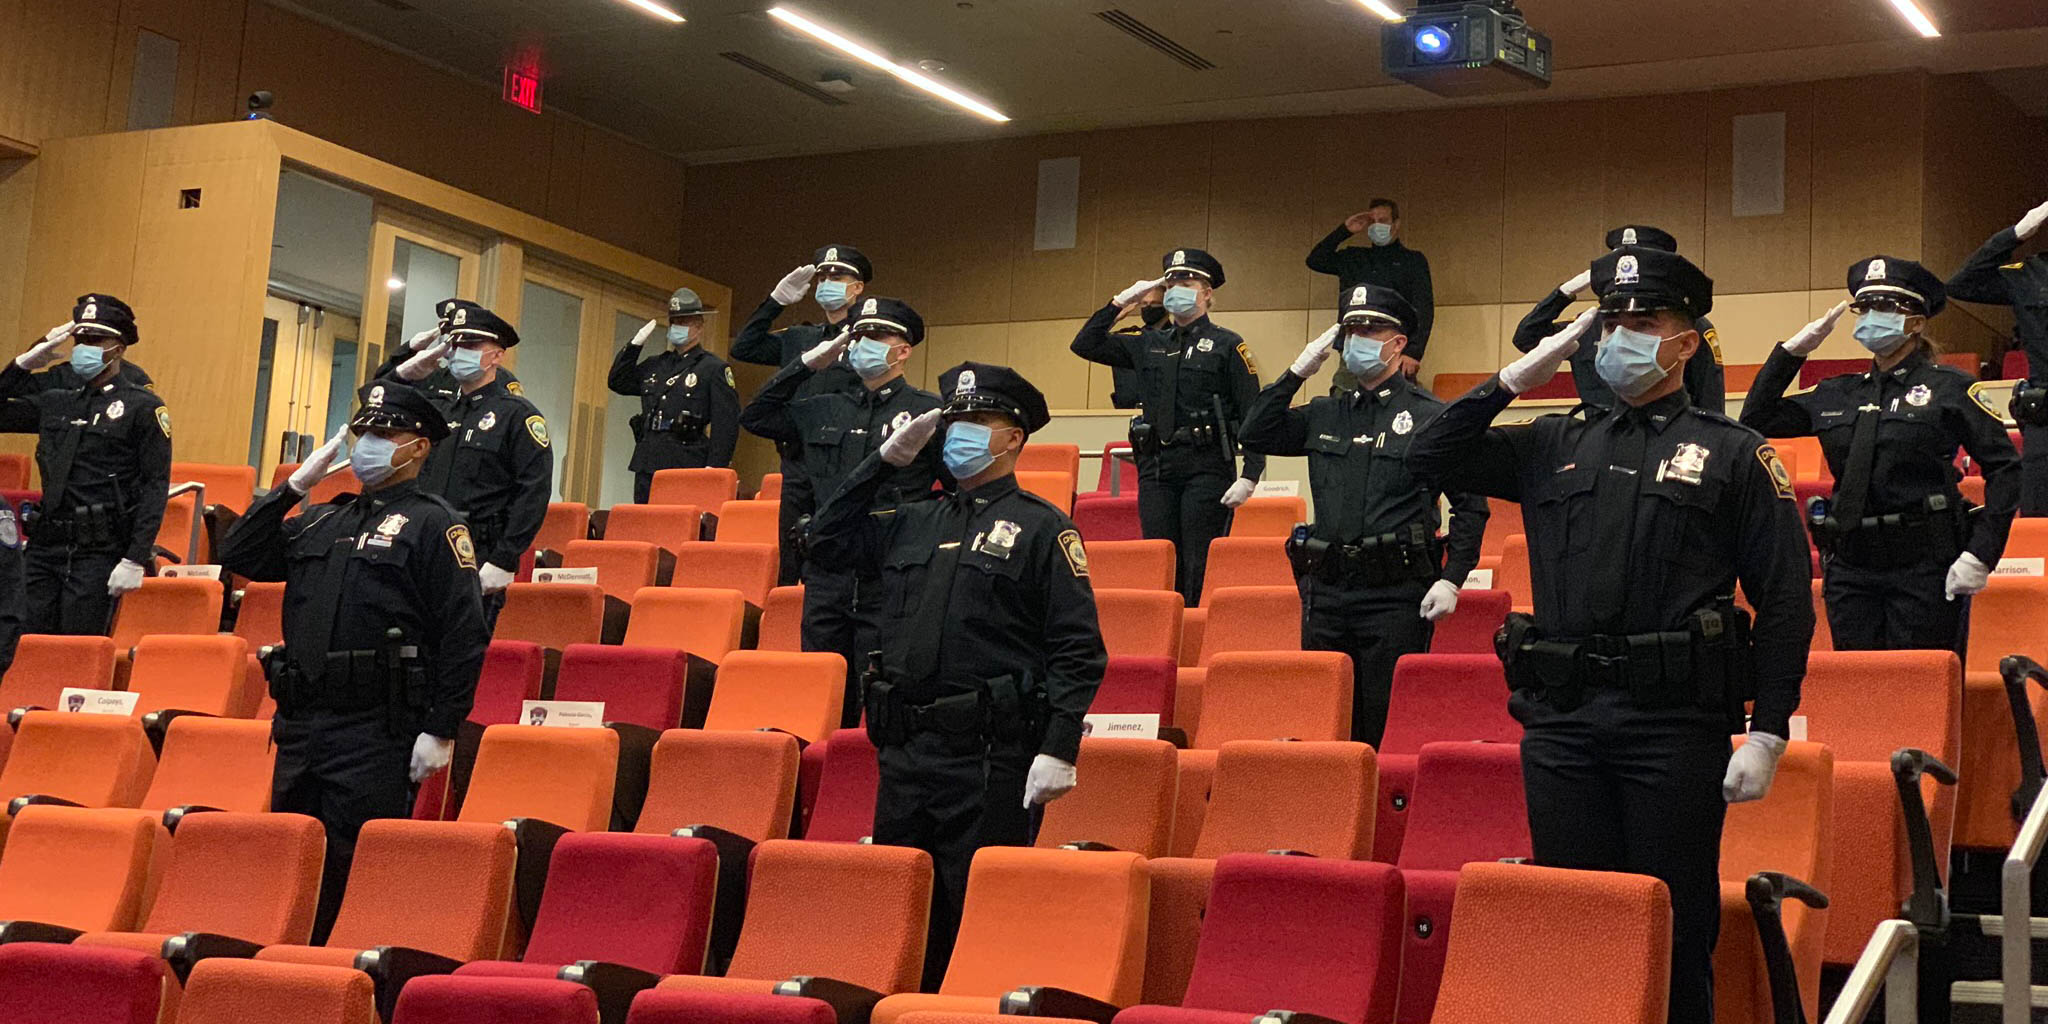 Officers saluting in a classroom